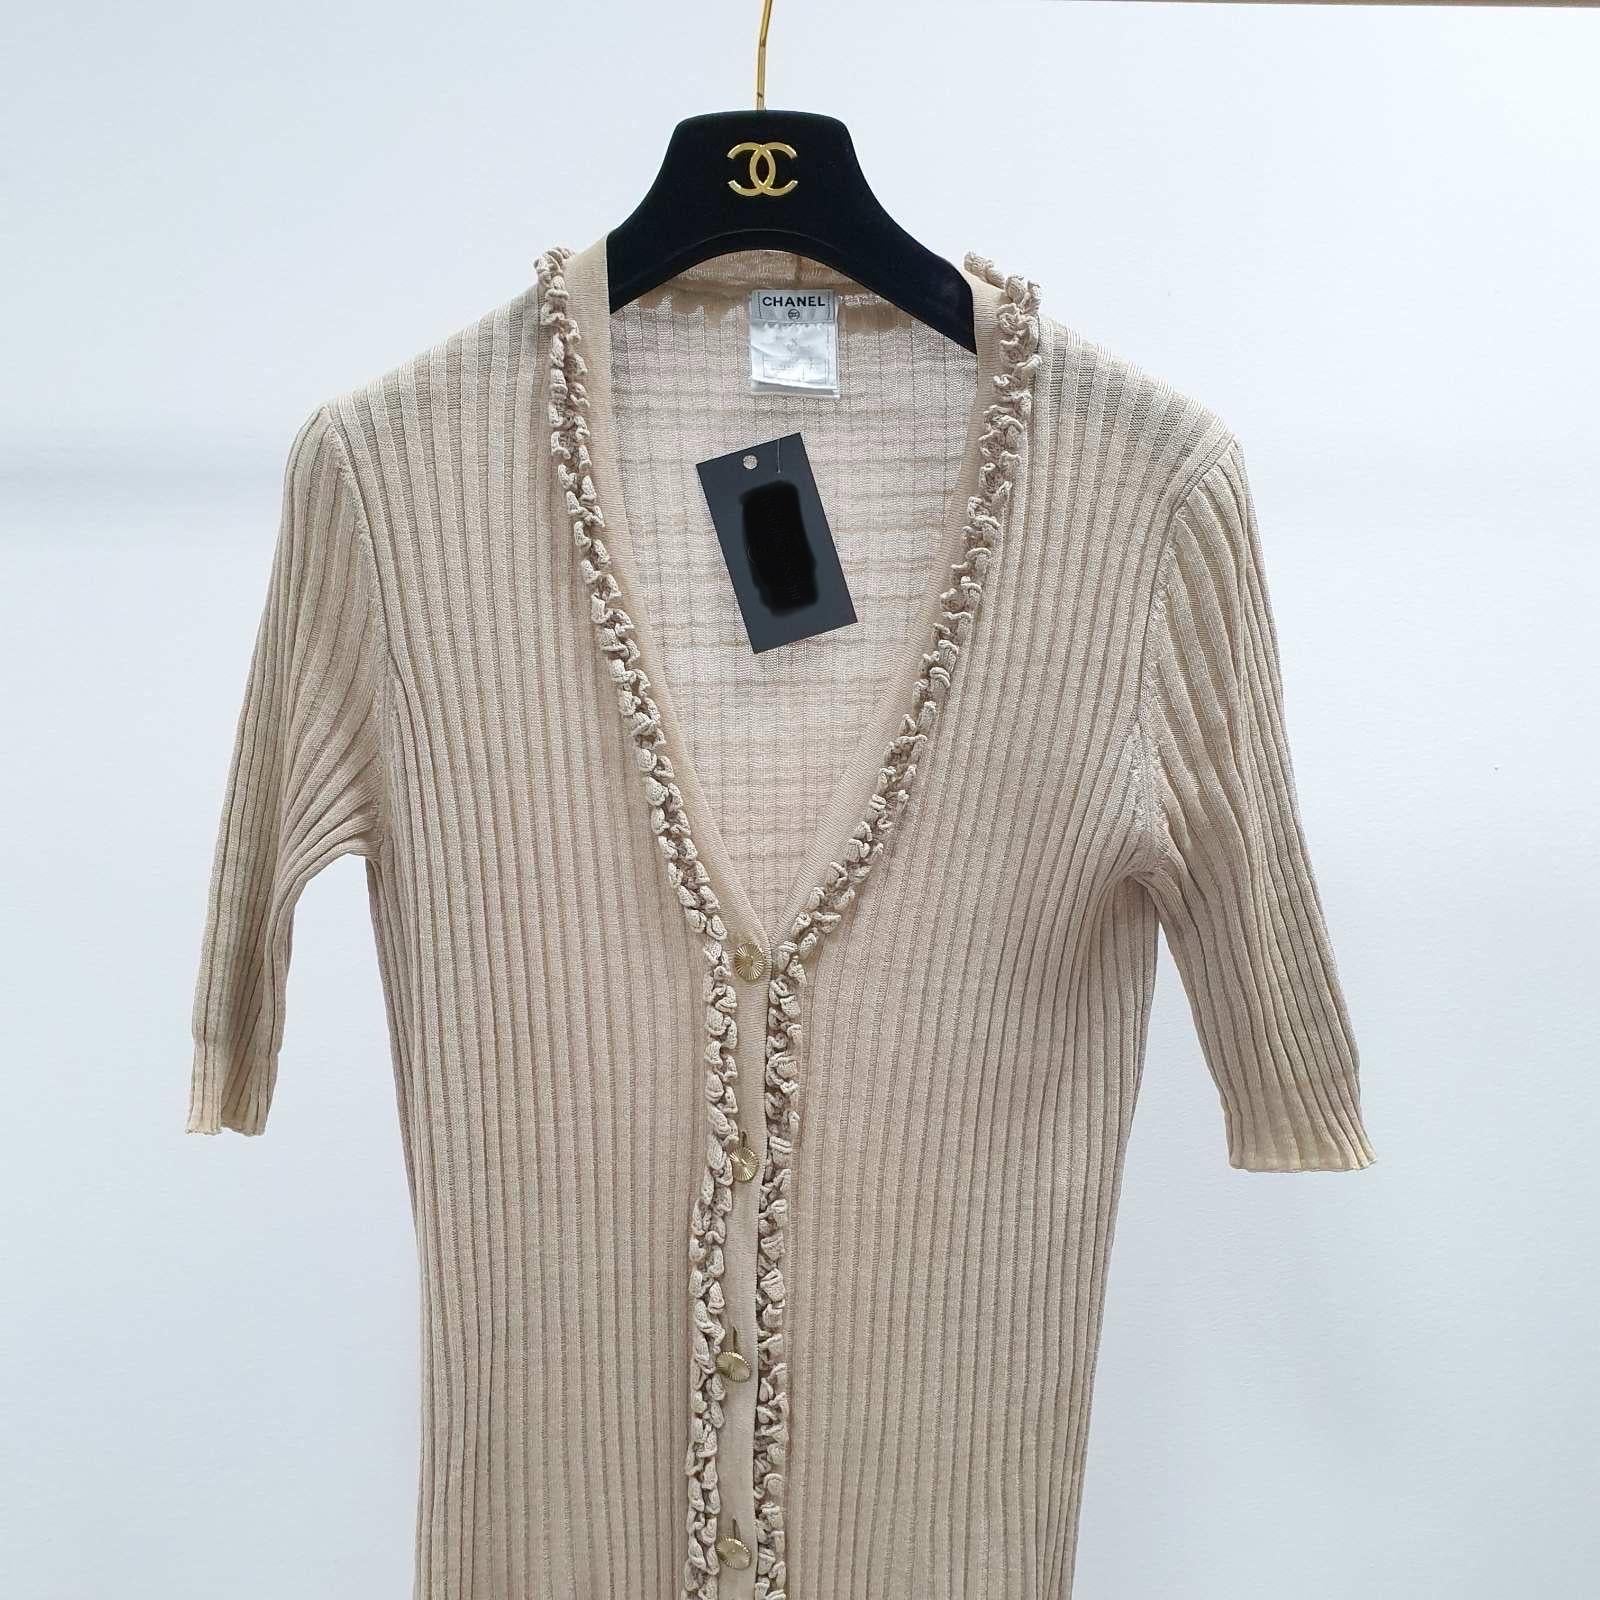 Chanel Spring 2009 Beige Cardigan Dress Tunic  In Good Condition For Sale In Krakow, PL